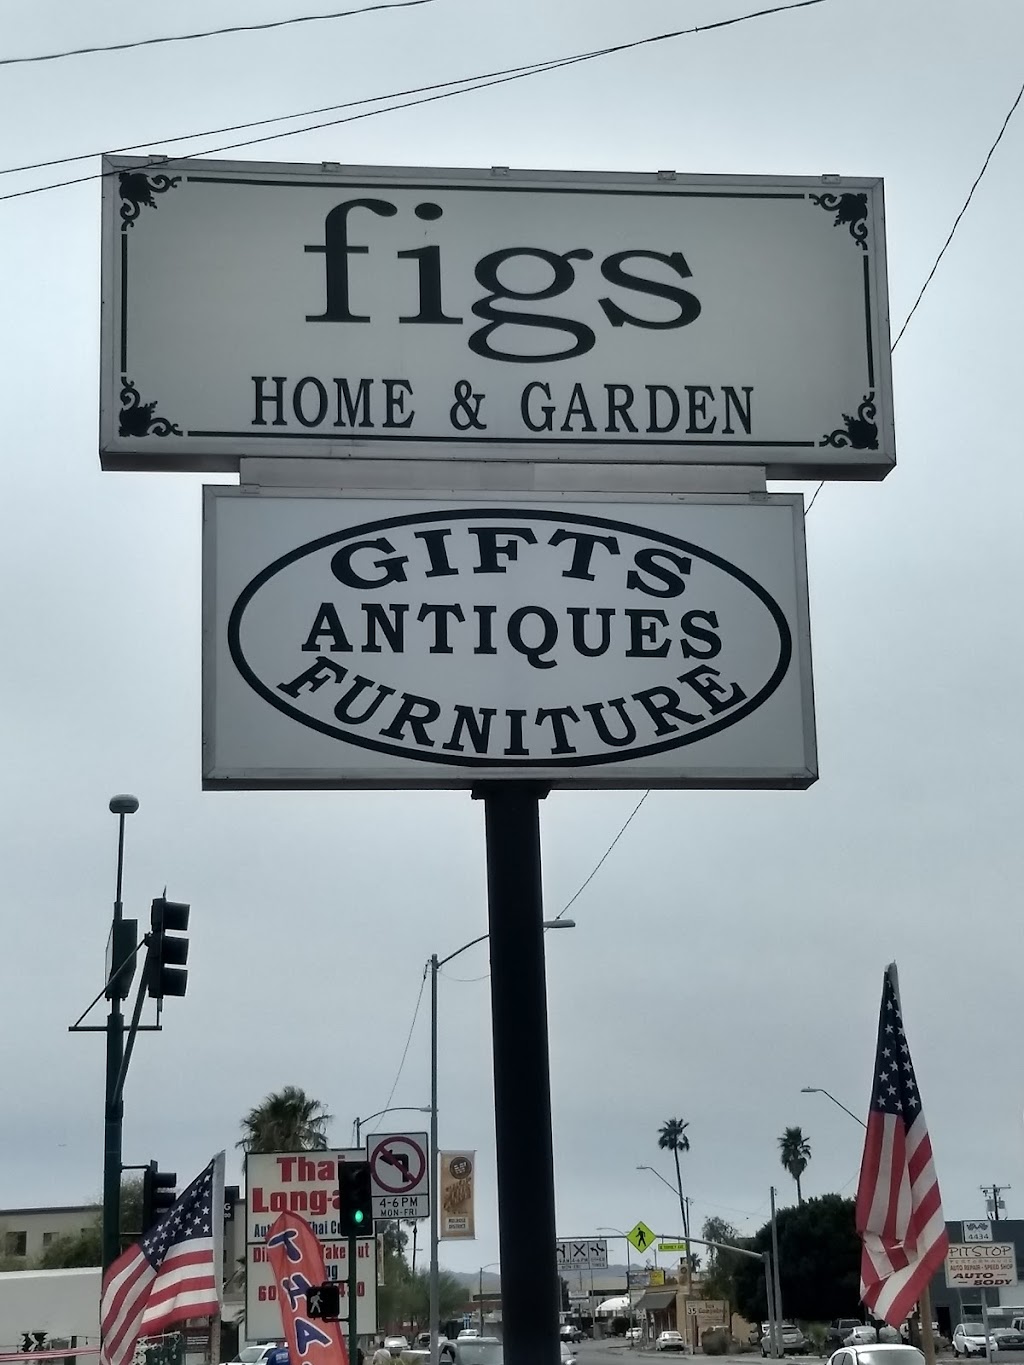 Figs Home and Garden | 4501 N 7th Ave, Phoenix, AZ 85013, USA | Phone: (602) 279-1443